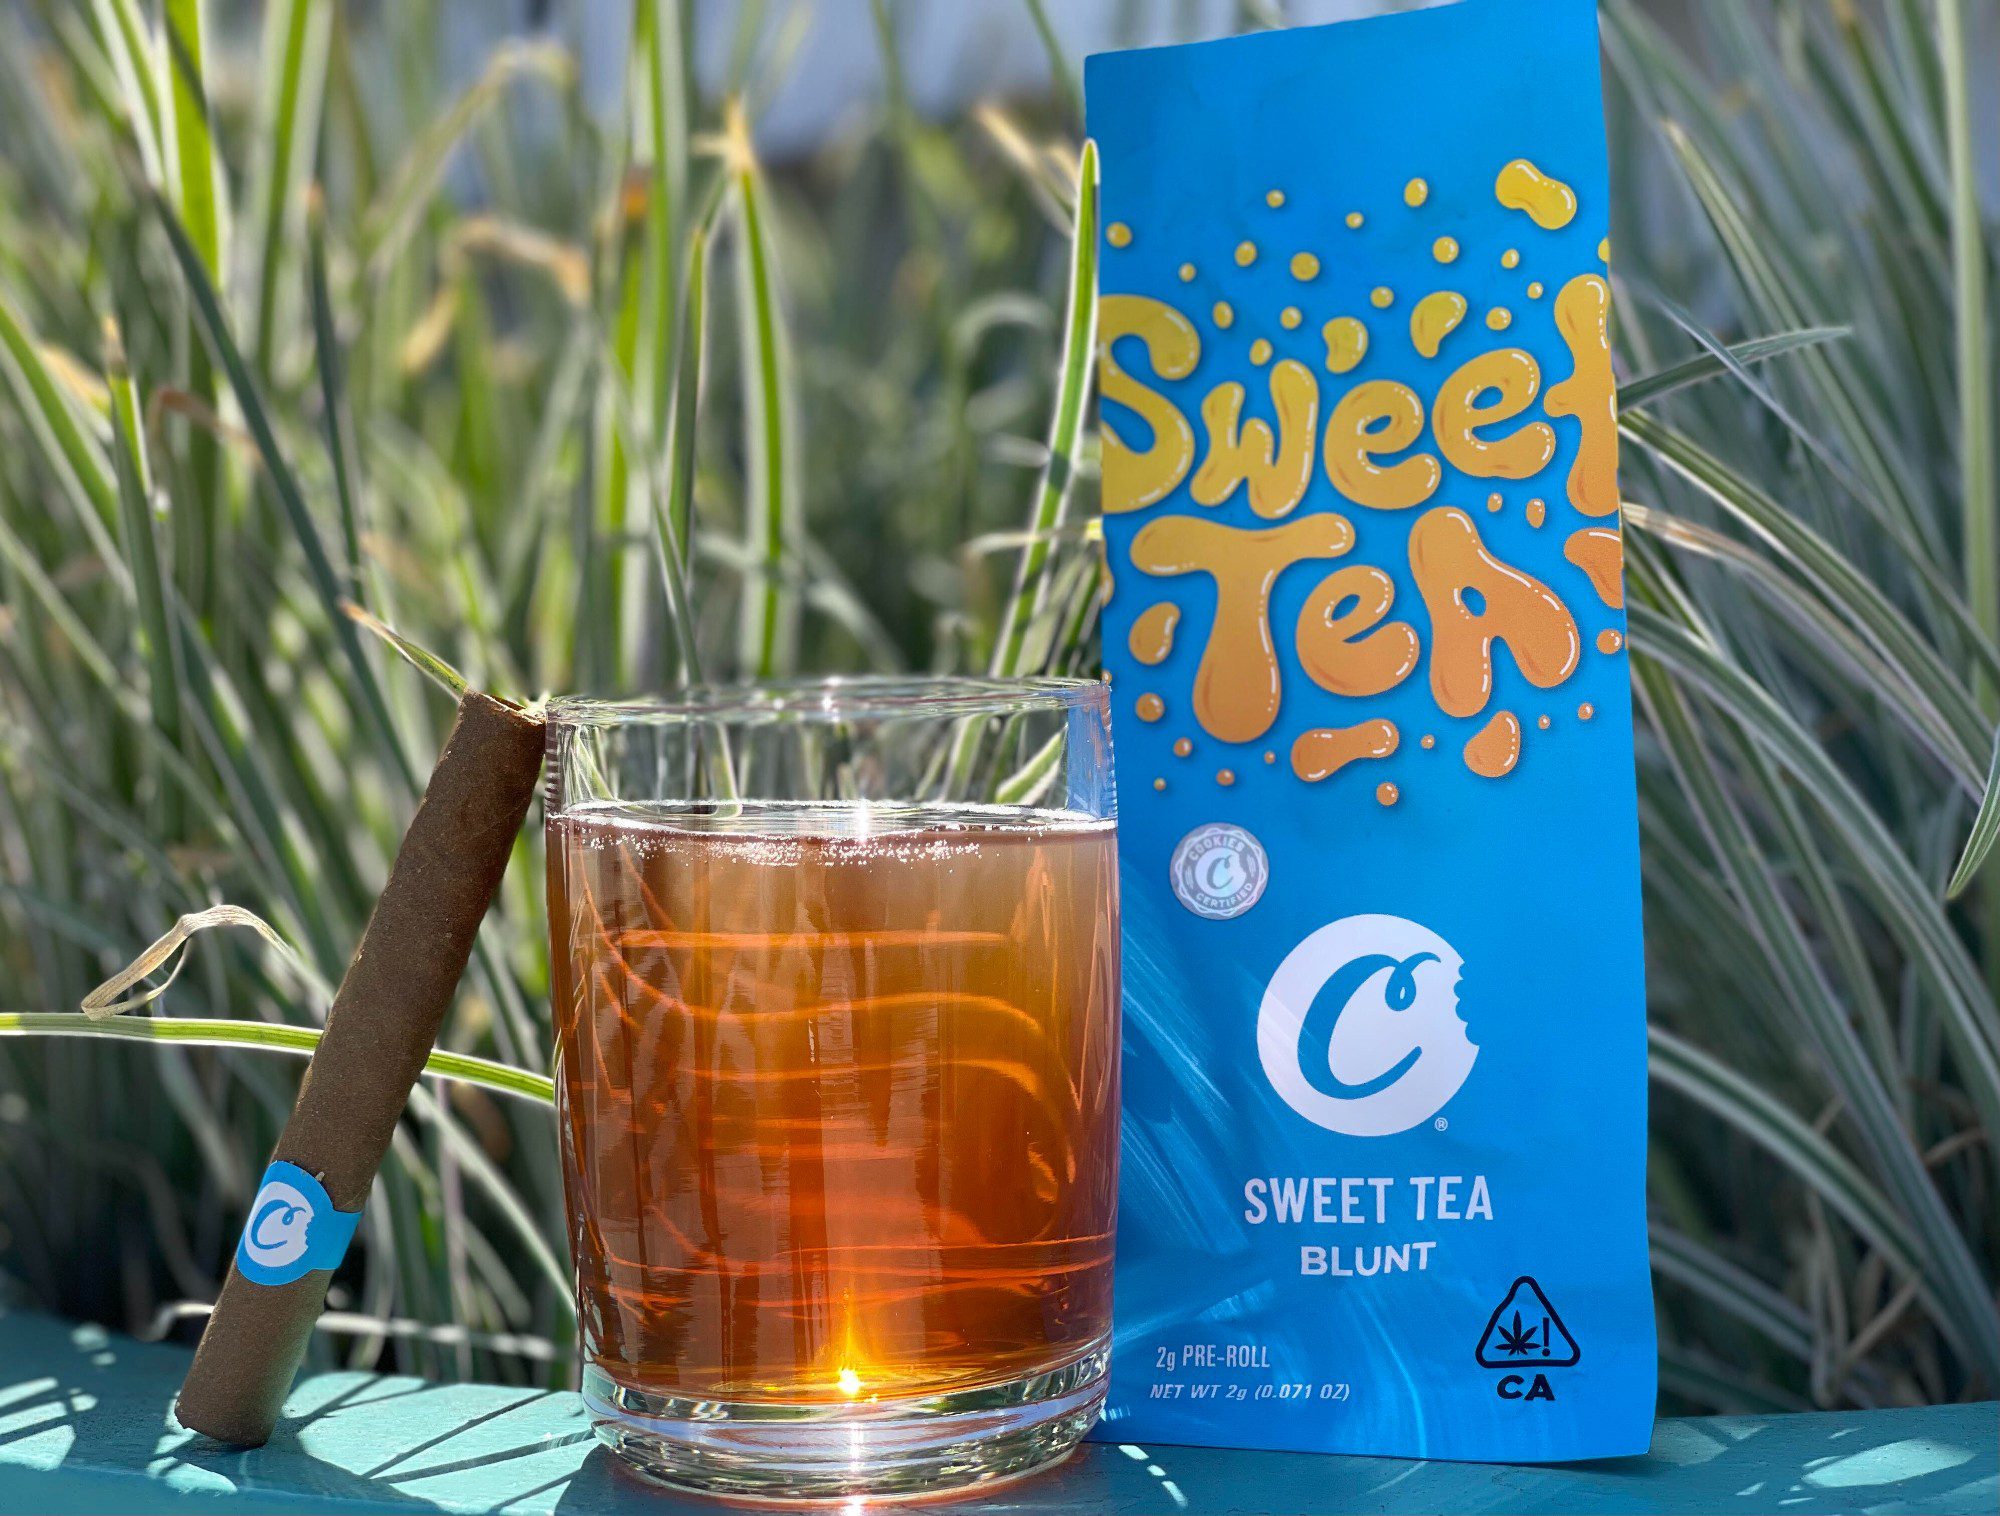 Sweet Tea Blunt review from Cookies_Emjay